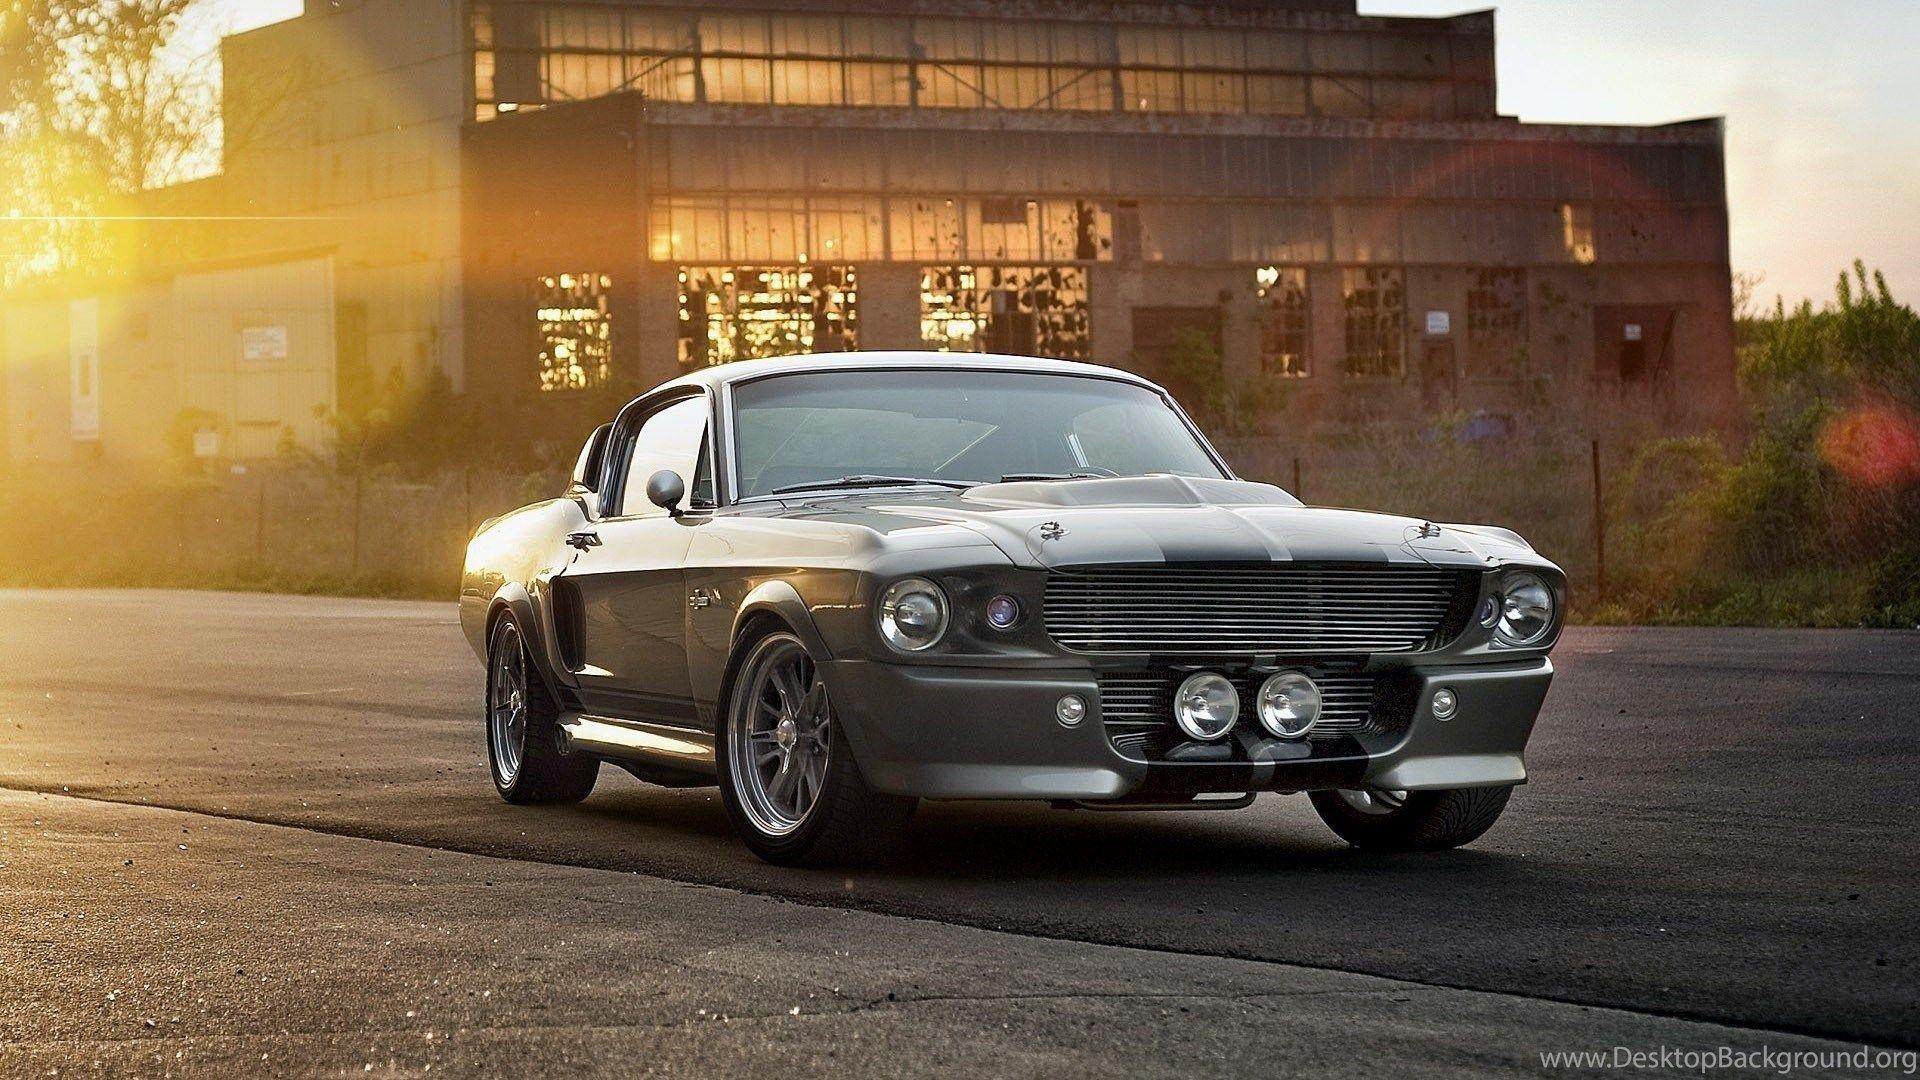 Ford Mustang Shelby GT500 Eleanor Wallpaper, Ford Mustang Gt500